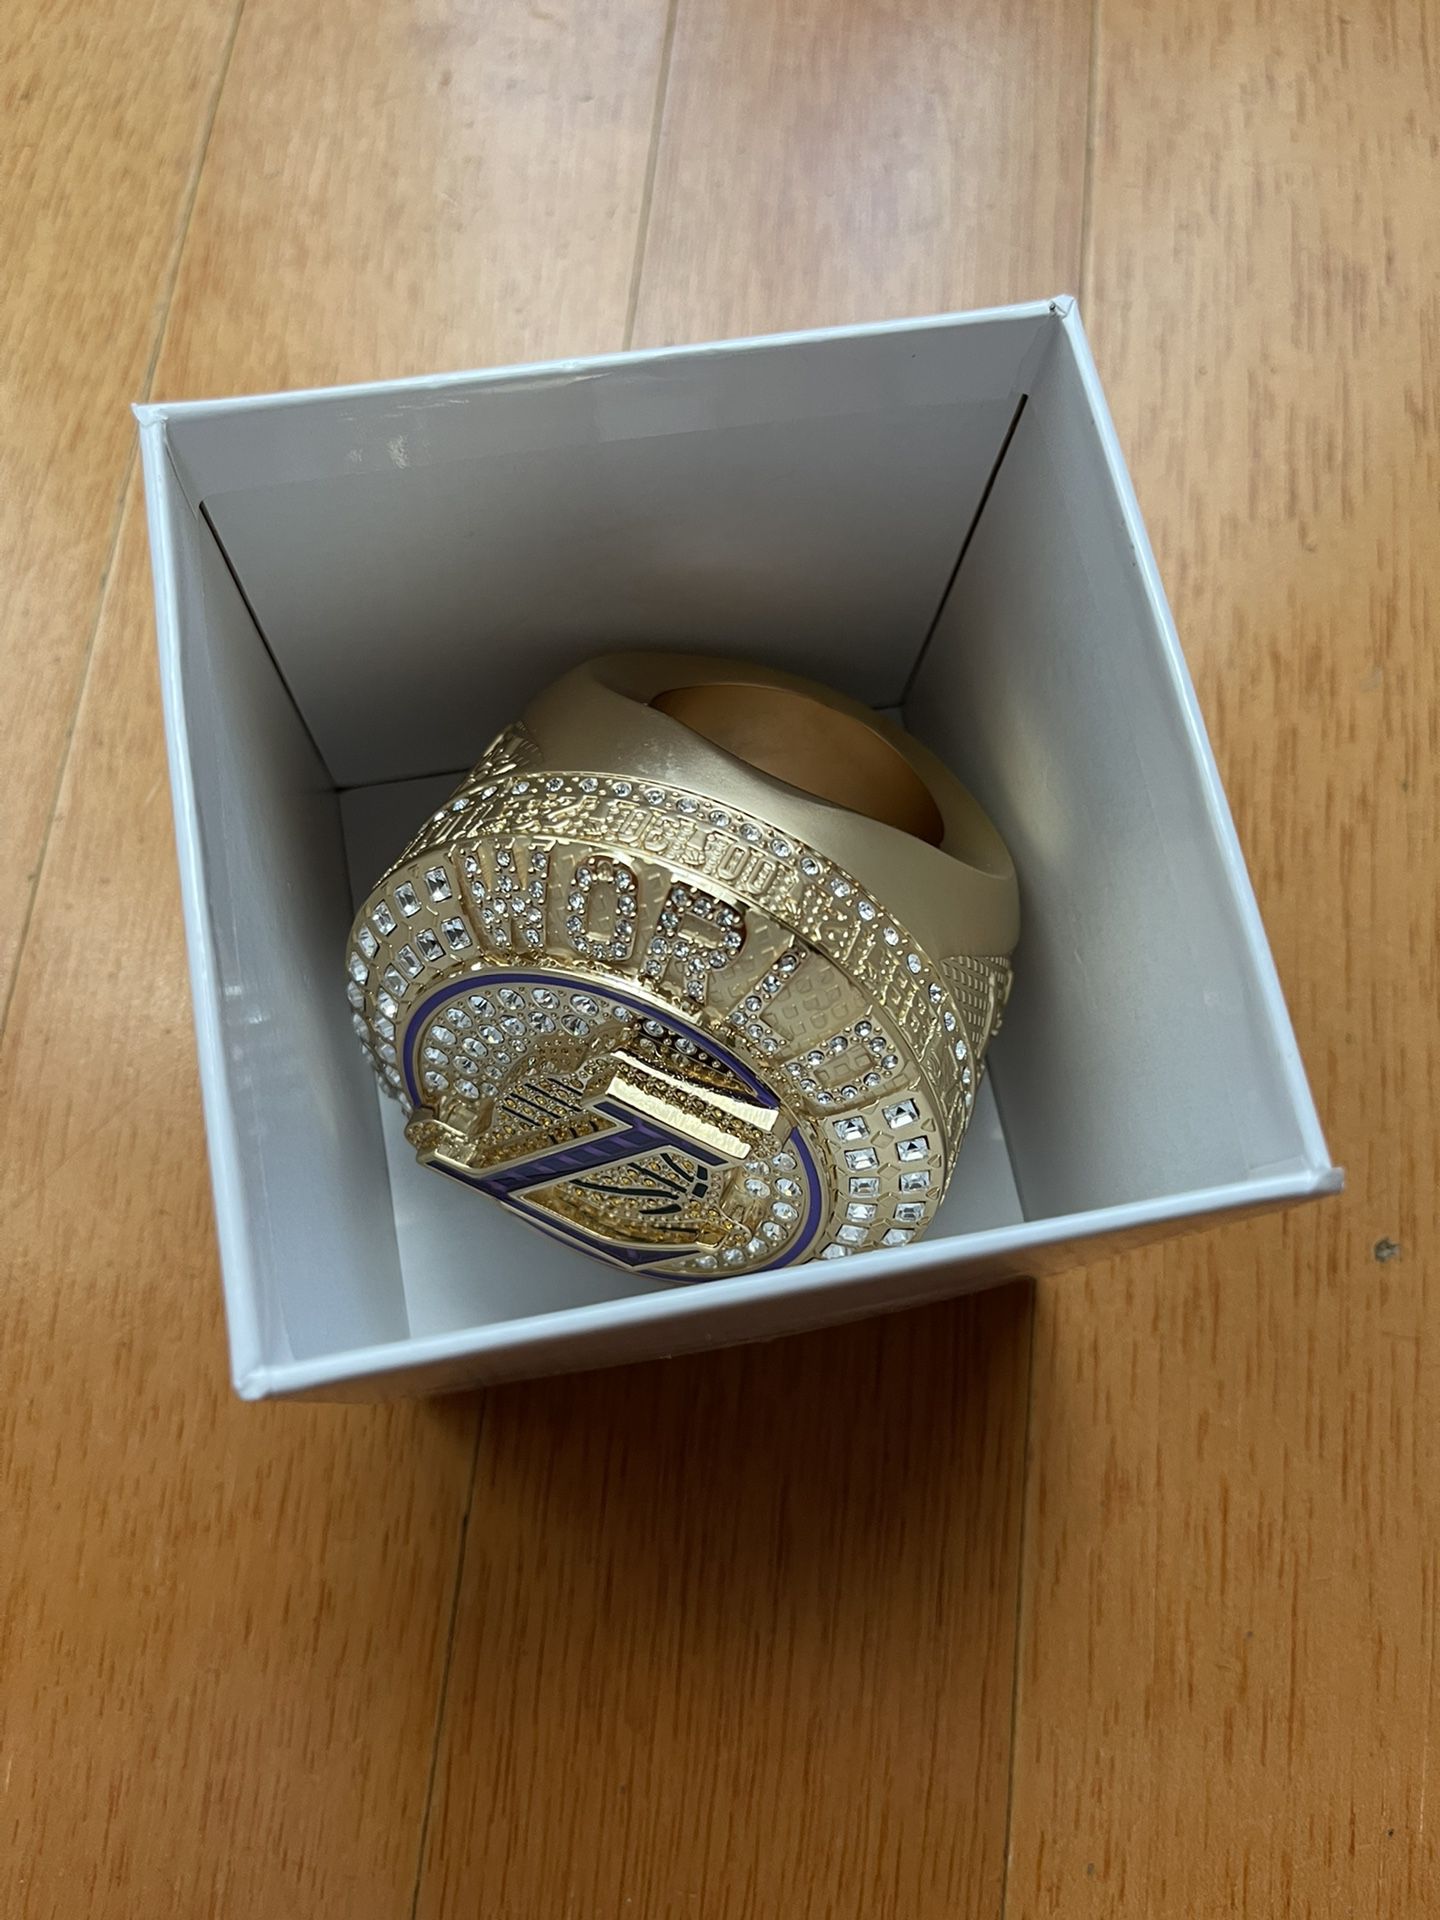 Los Angeles Lakers NBA 2020 Championship Paperweight Ring Season Ticket Gift